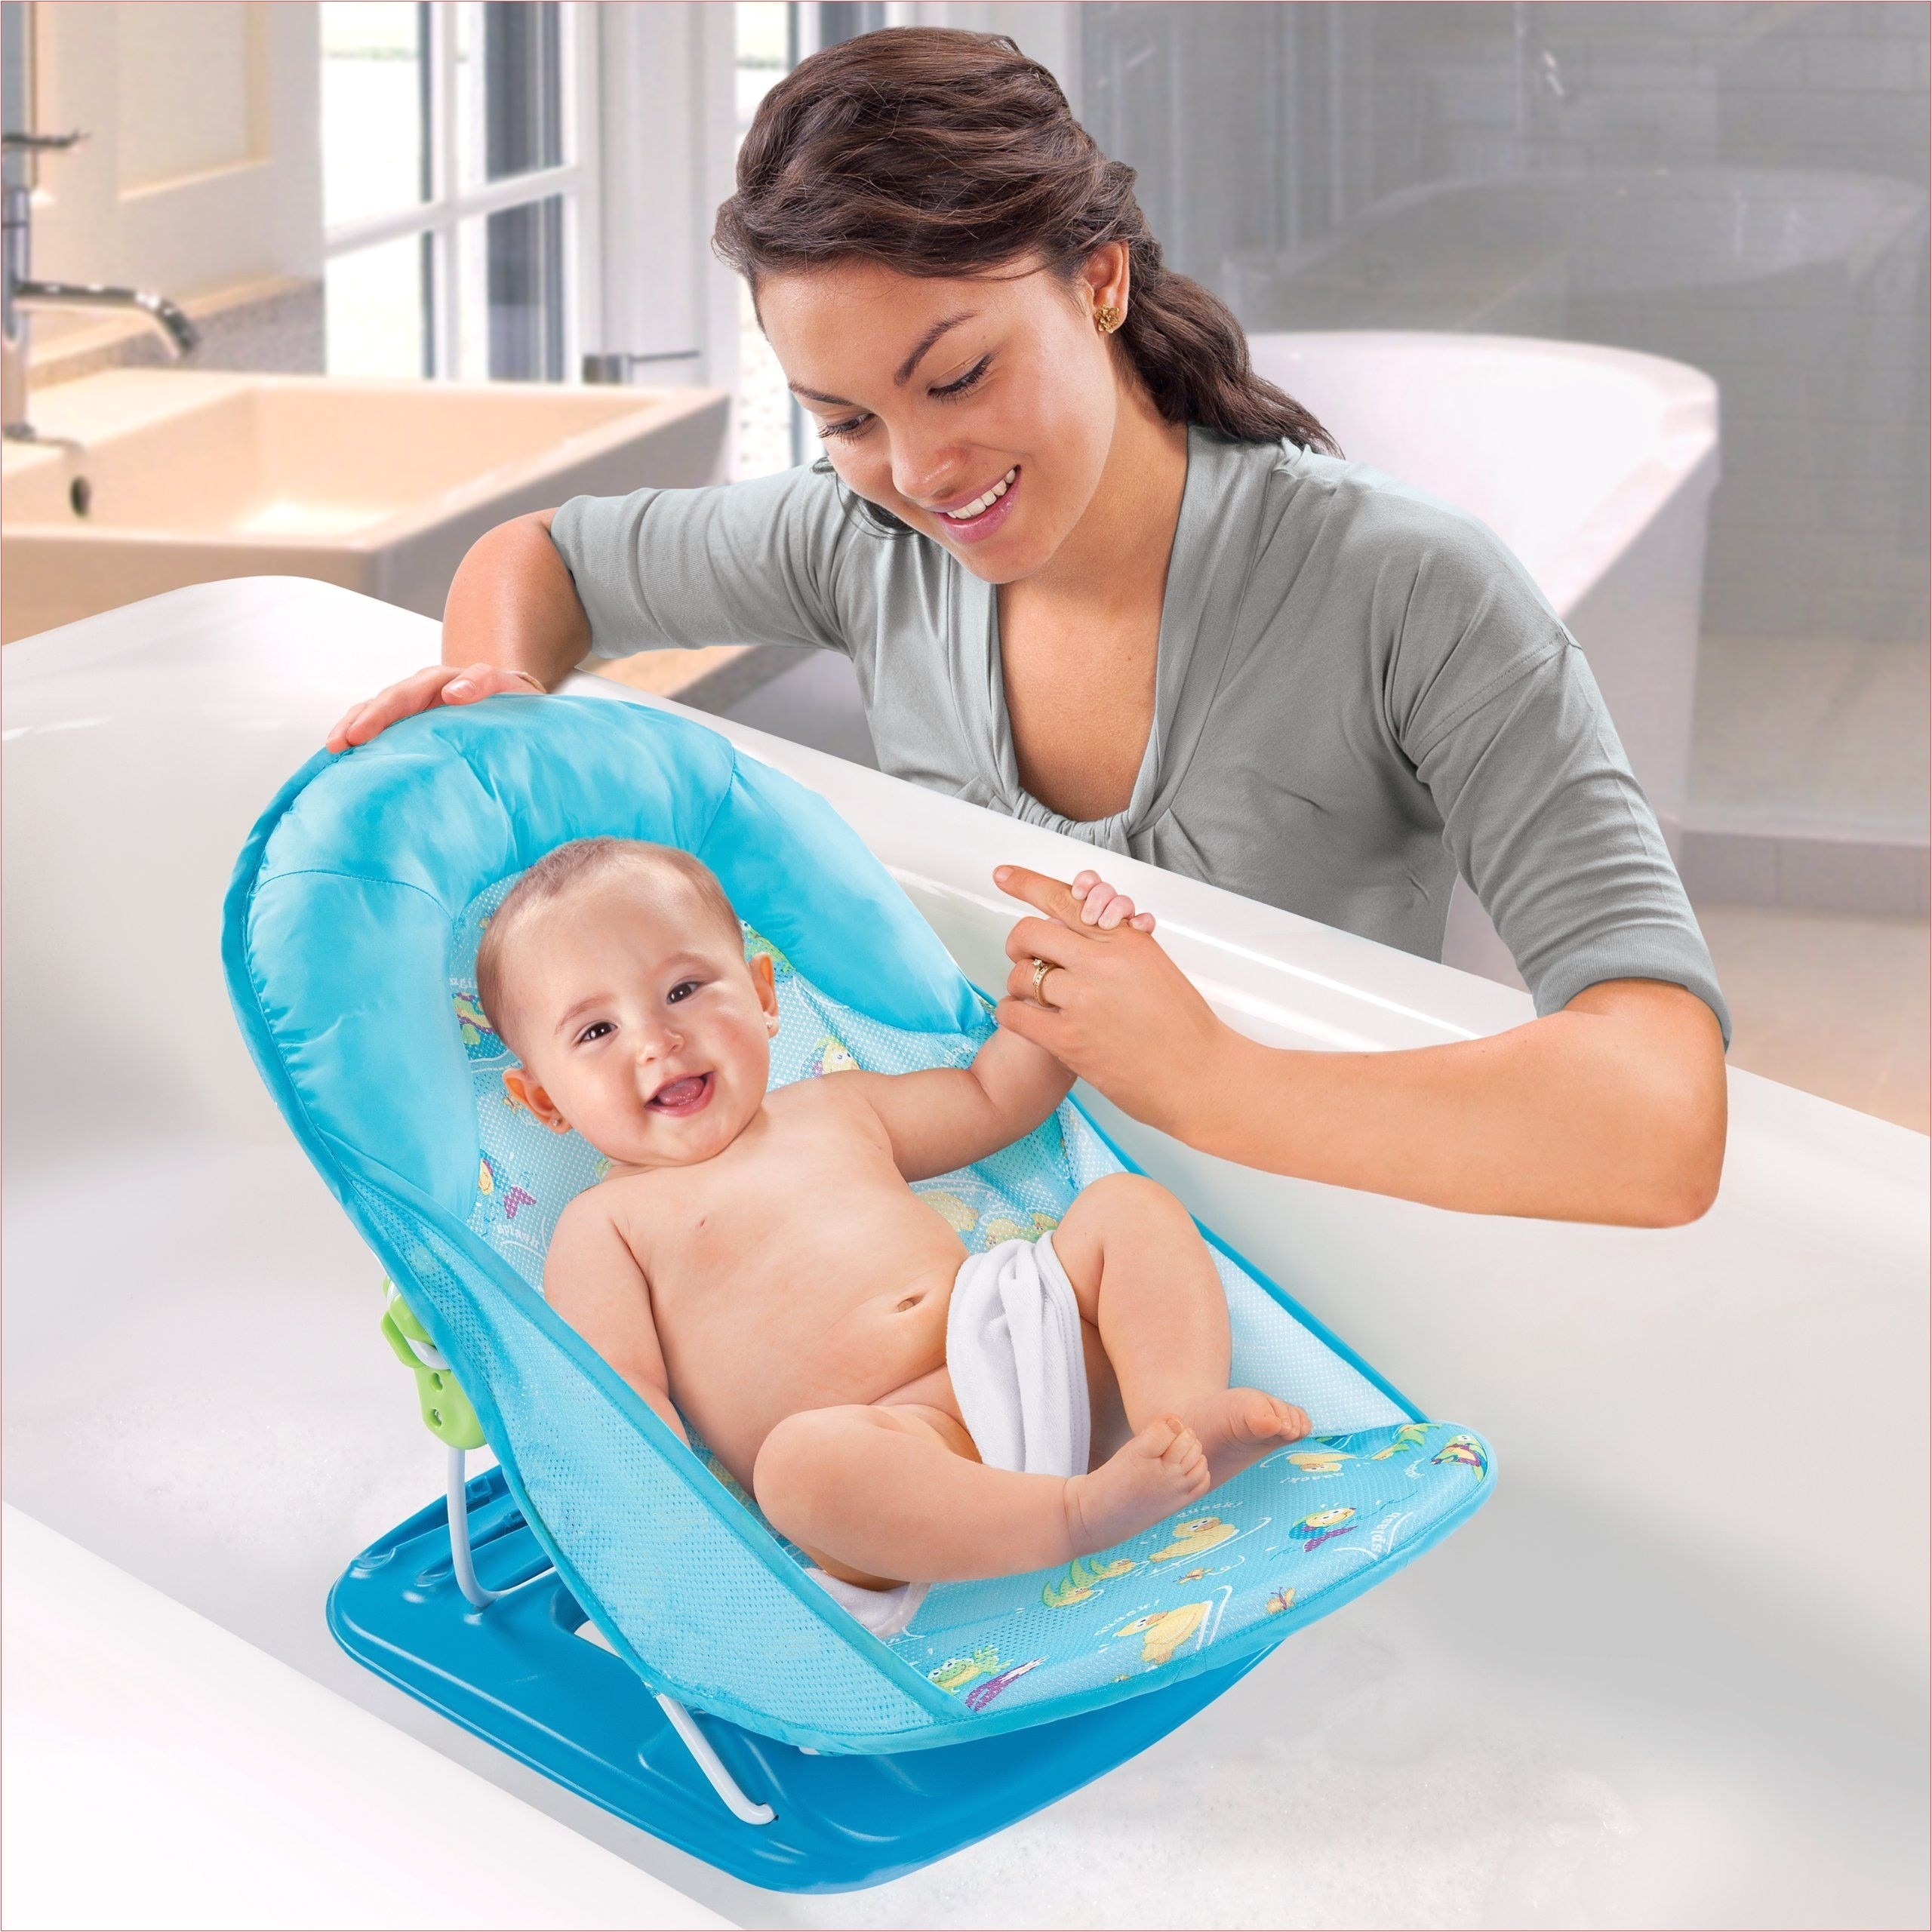 bath tub baby fresh amazon summer infant mother s touch deluxe baby bather blue new